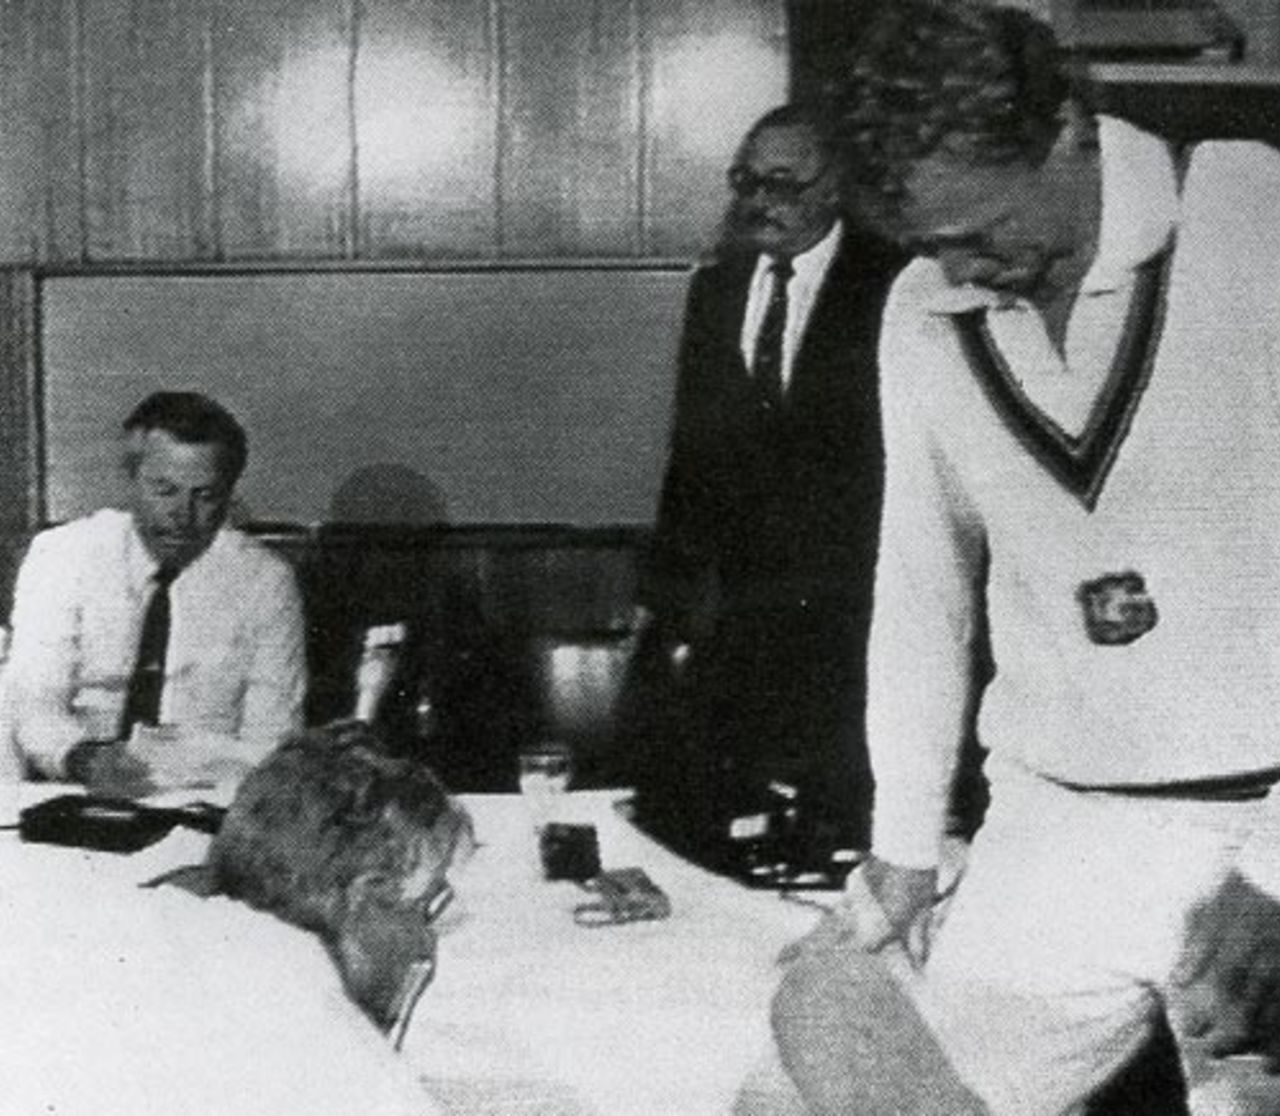 A tearful Kim Hughes walks out of a media conference after announcing his resignation as captain, Brisbane, November 26, 1984